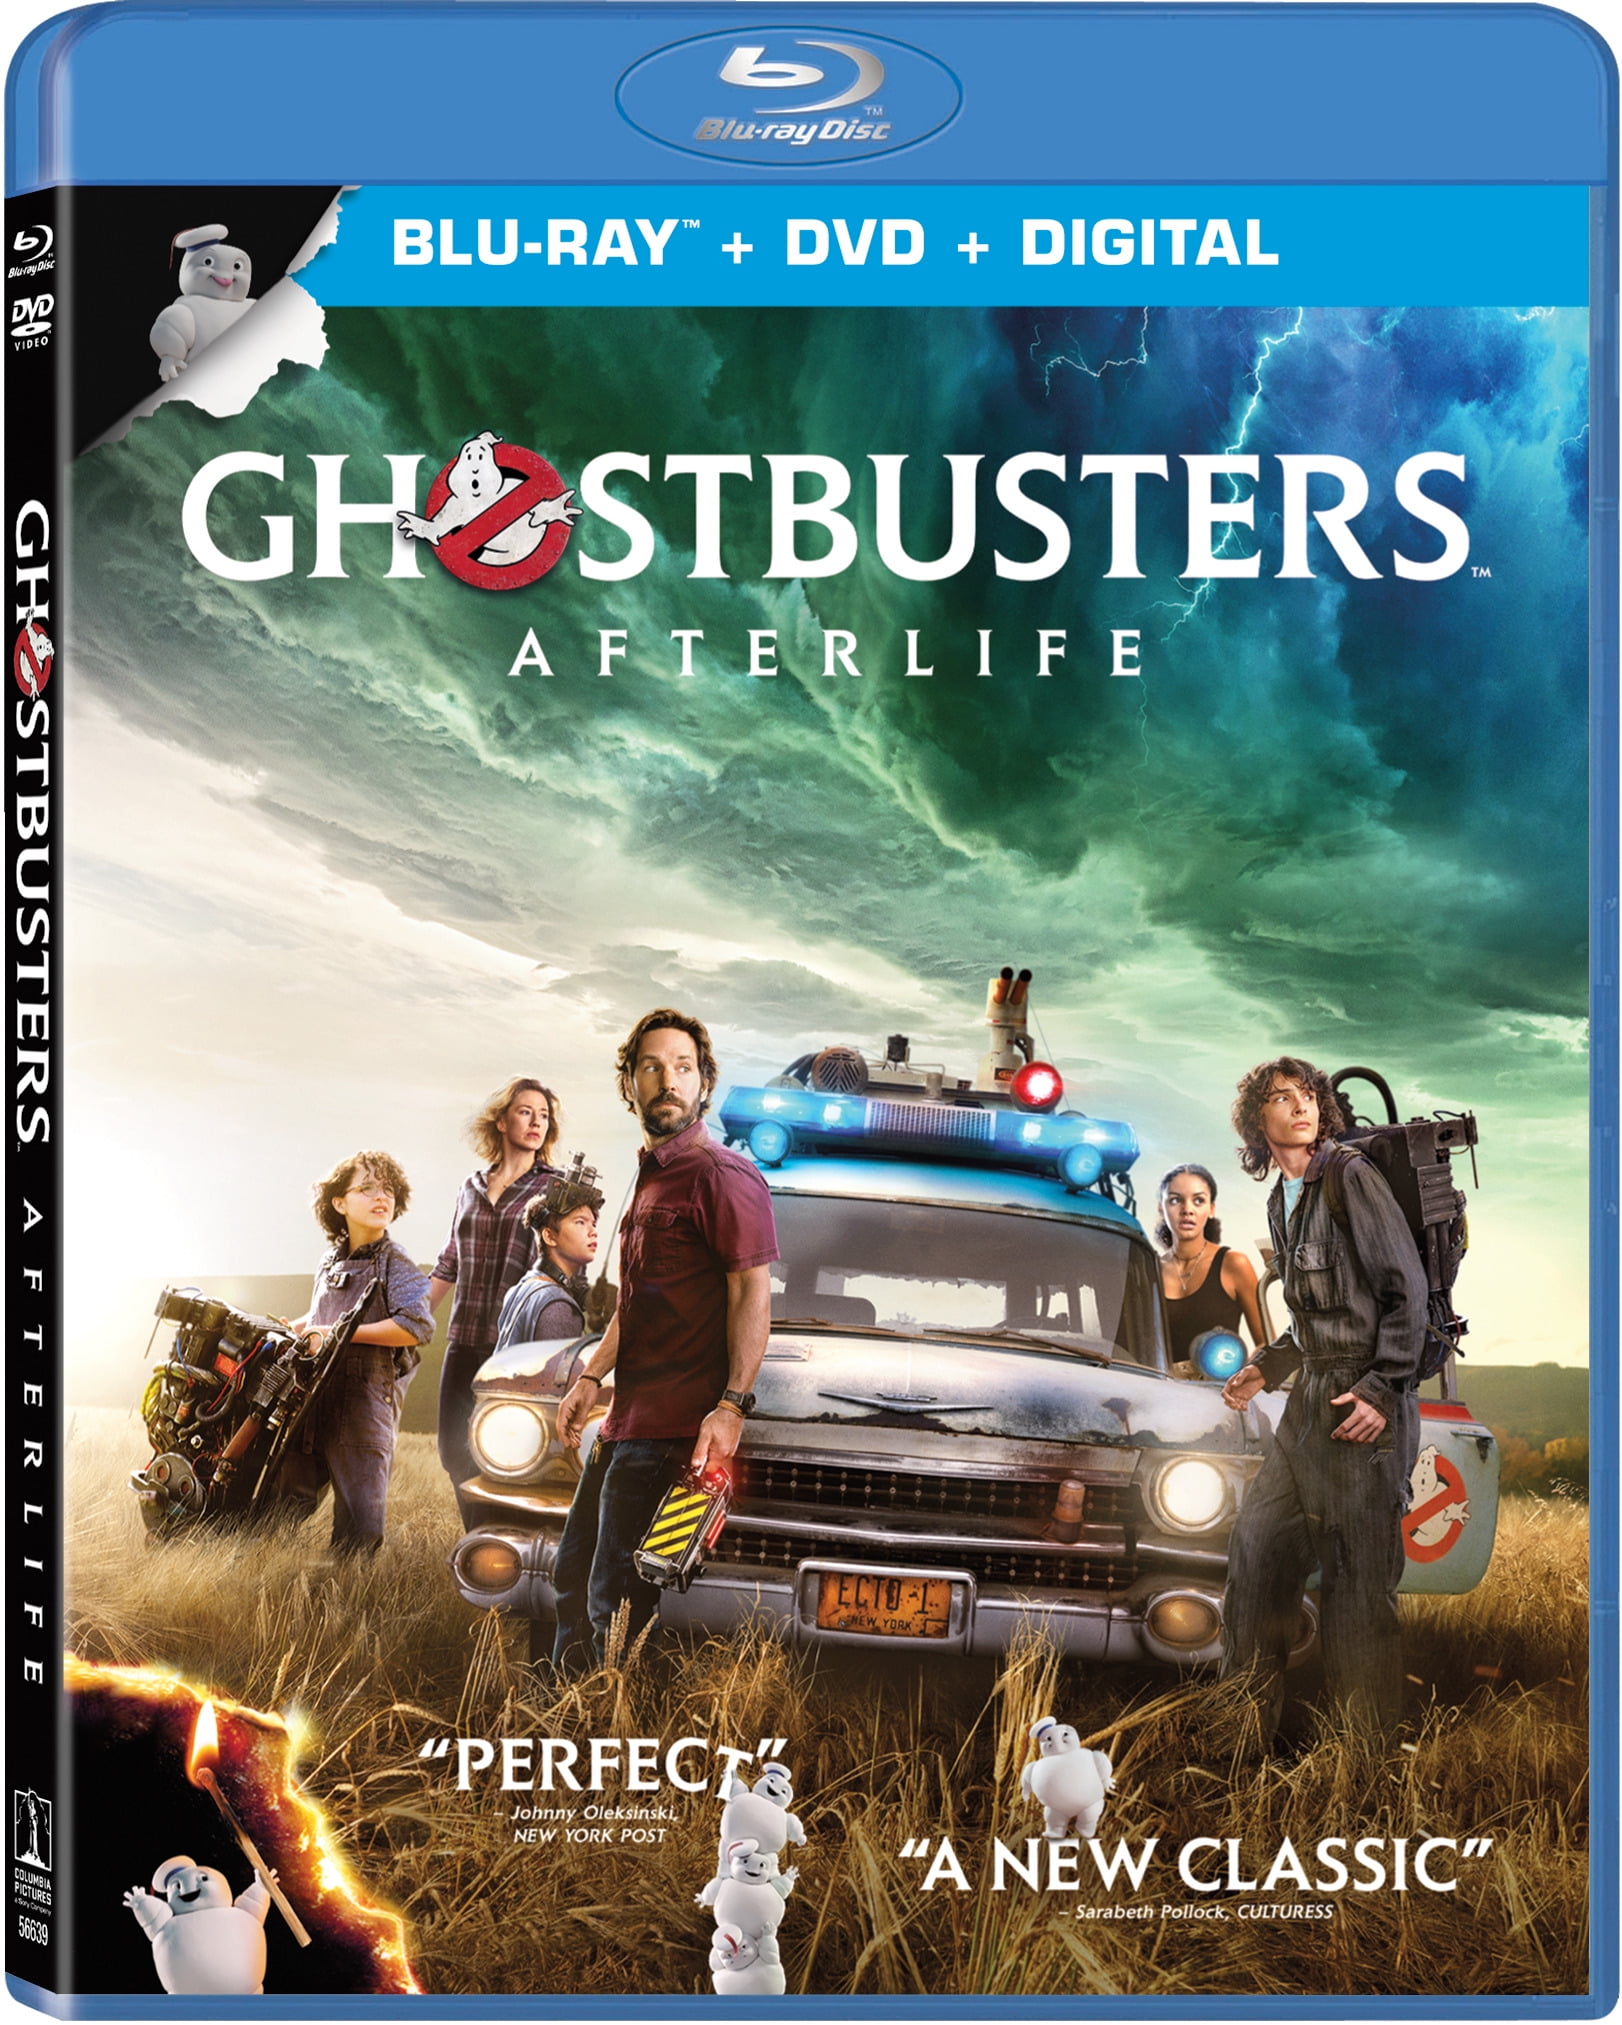 Sony Pictures Entertainment Ghostbusters: Afterlife (Blu-Ray + DVD)